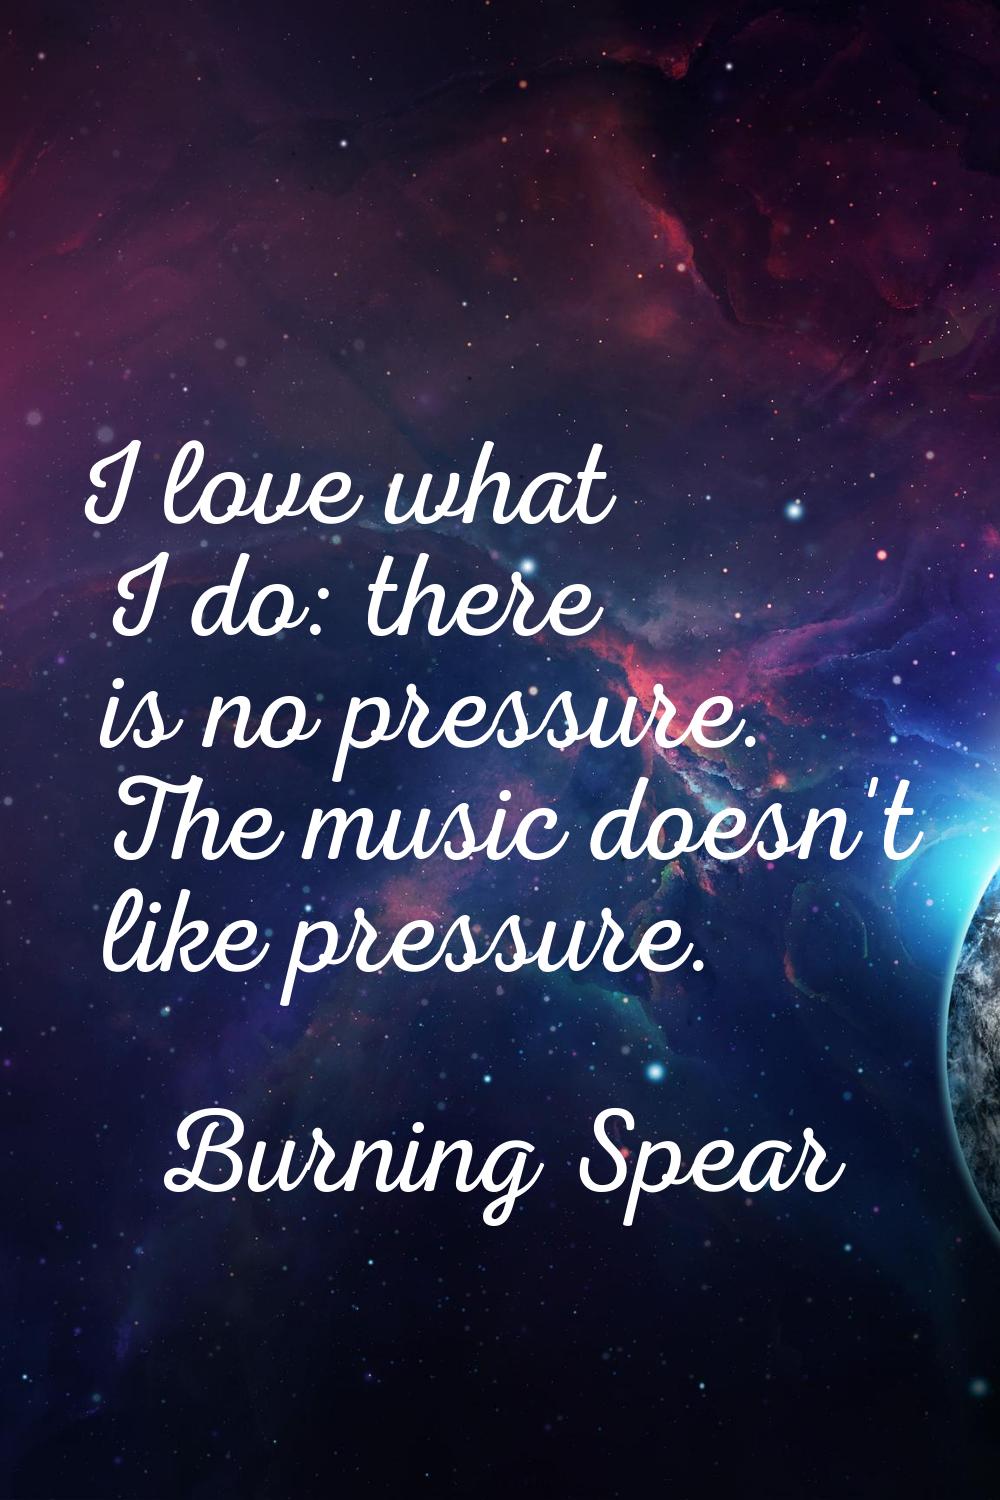 I love what I do: there is no pressure. The music doesn't like pressure.